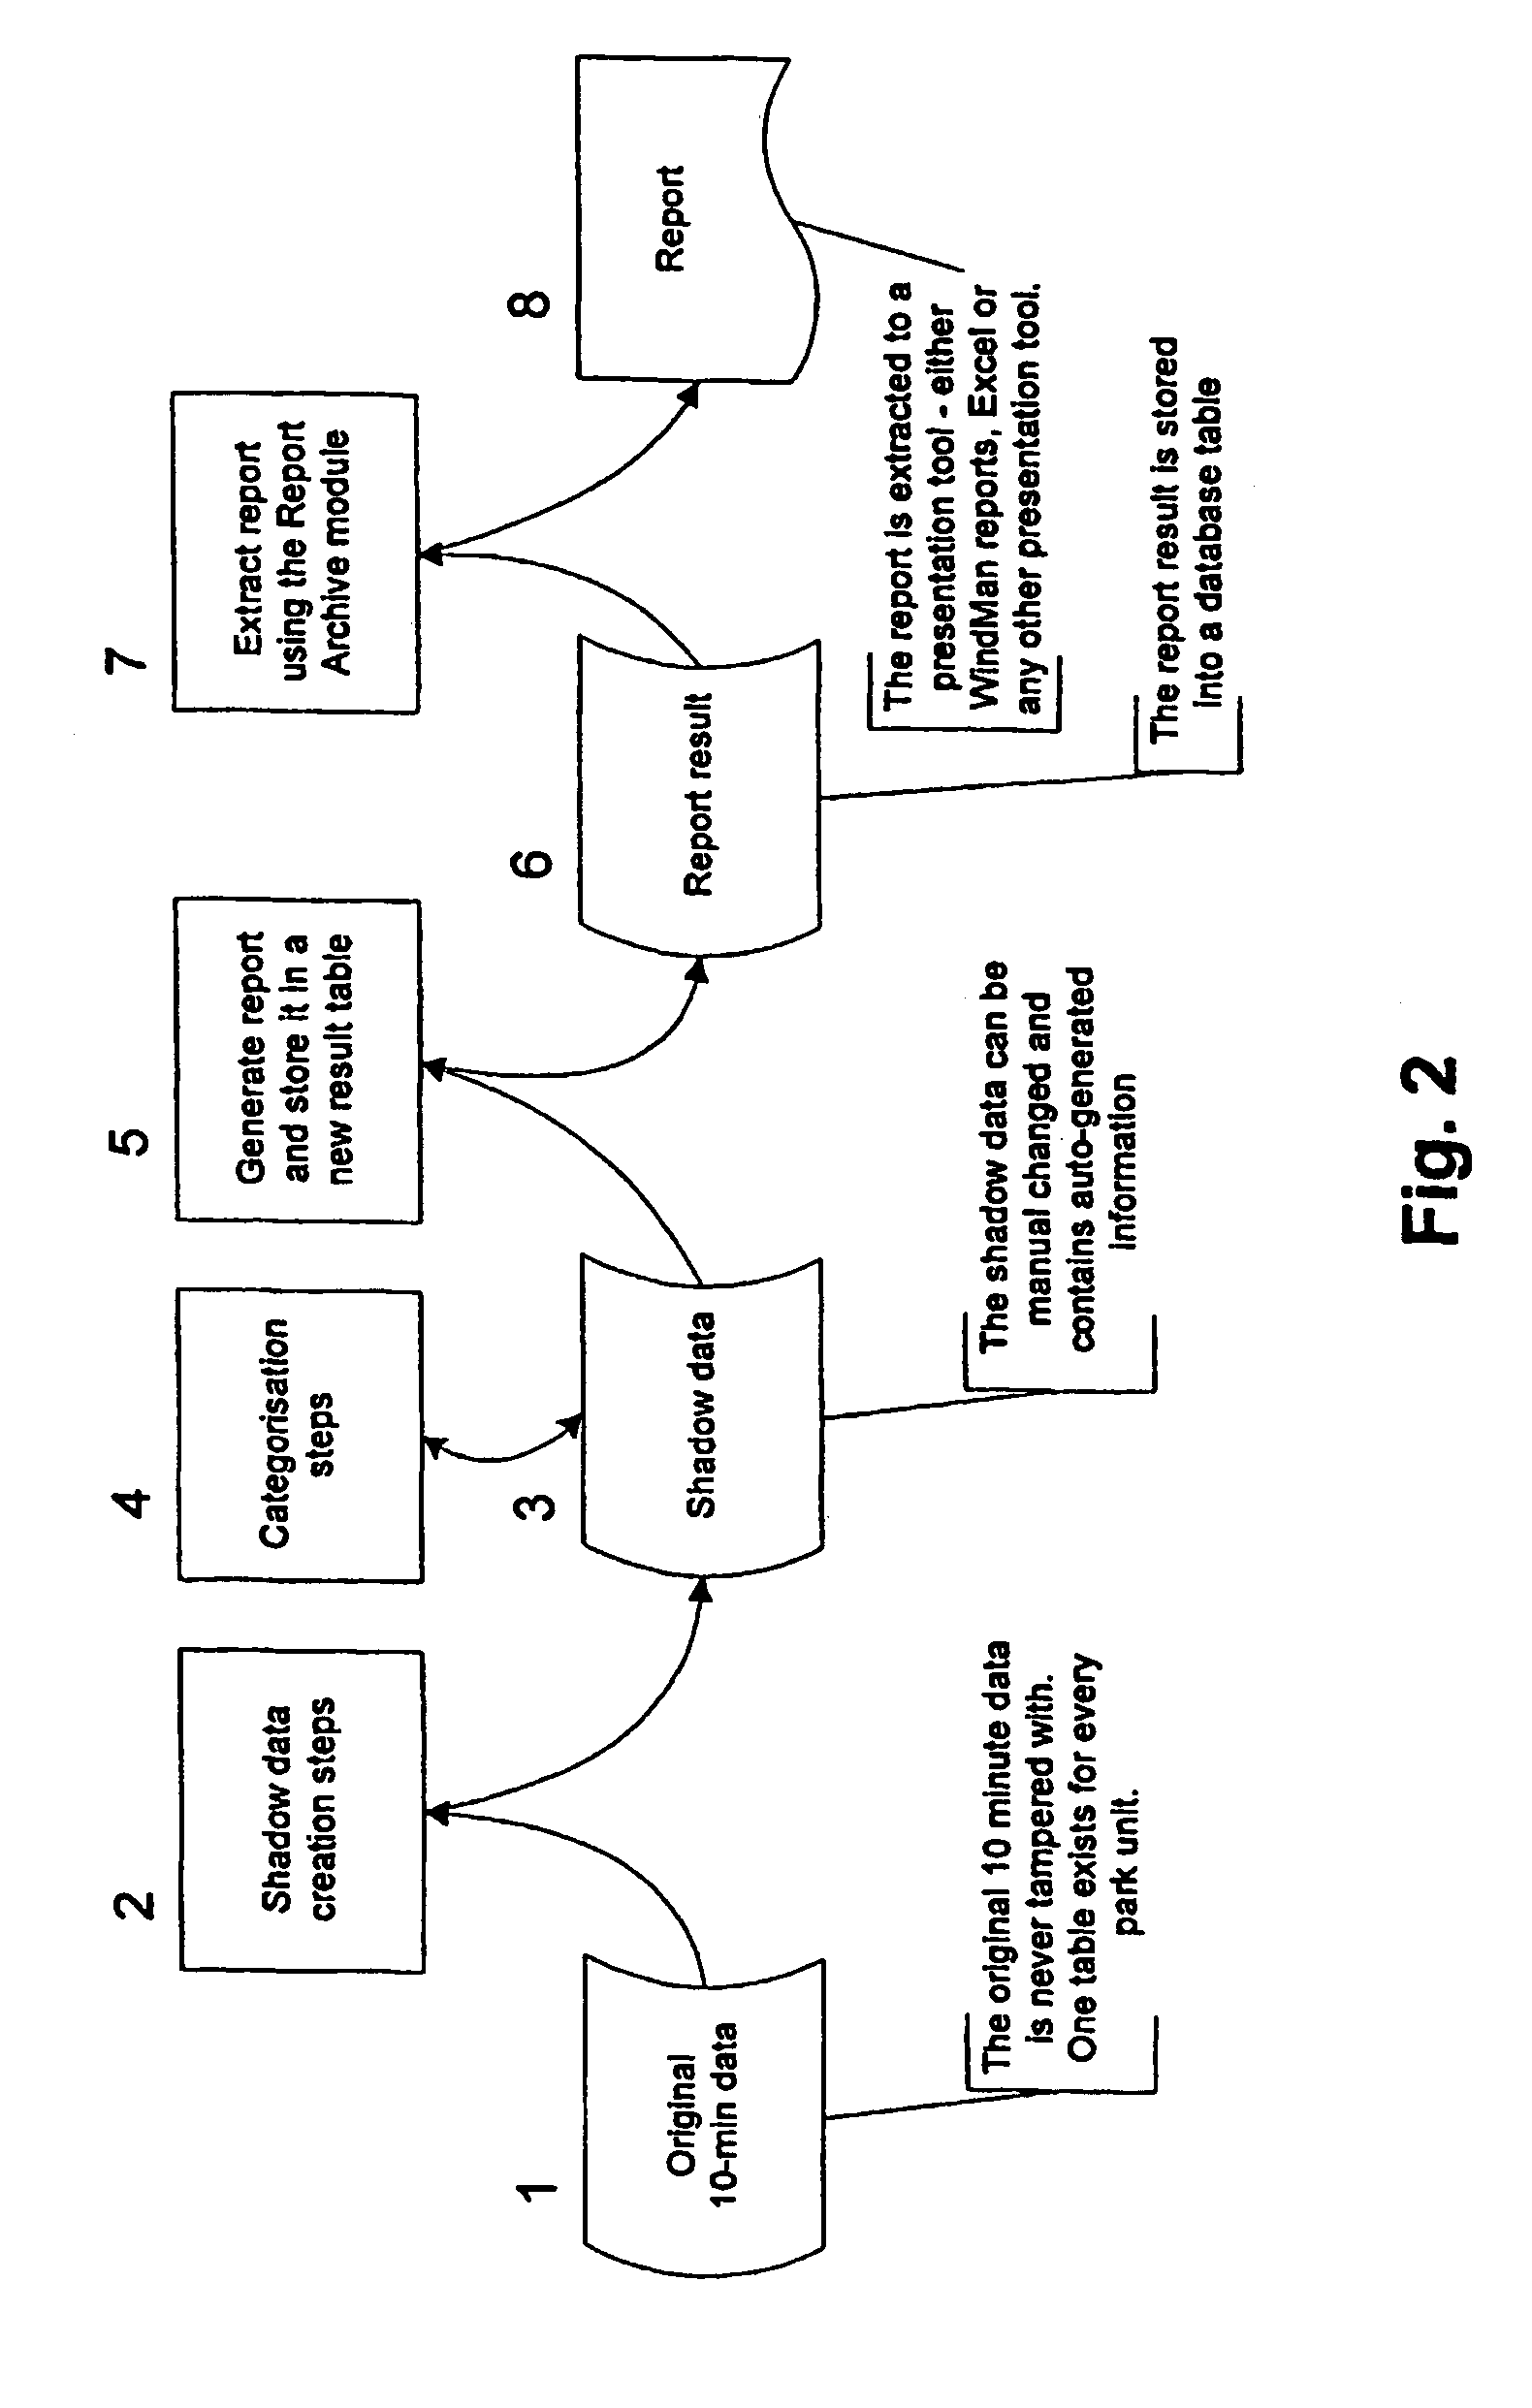 Method and a computer for handling operational data of wind power plants